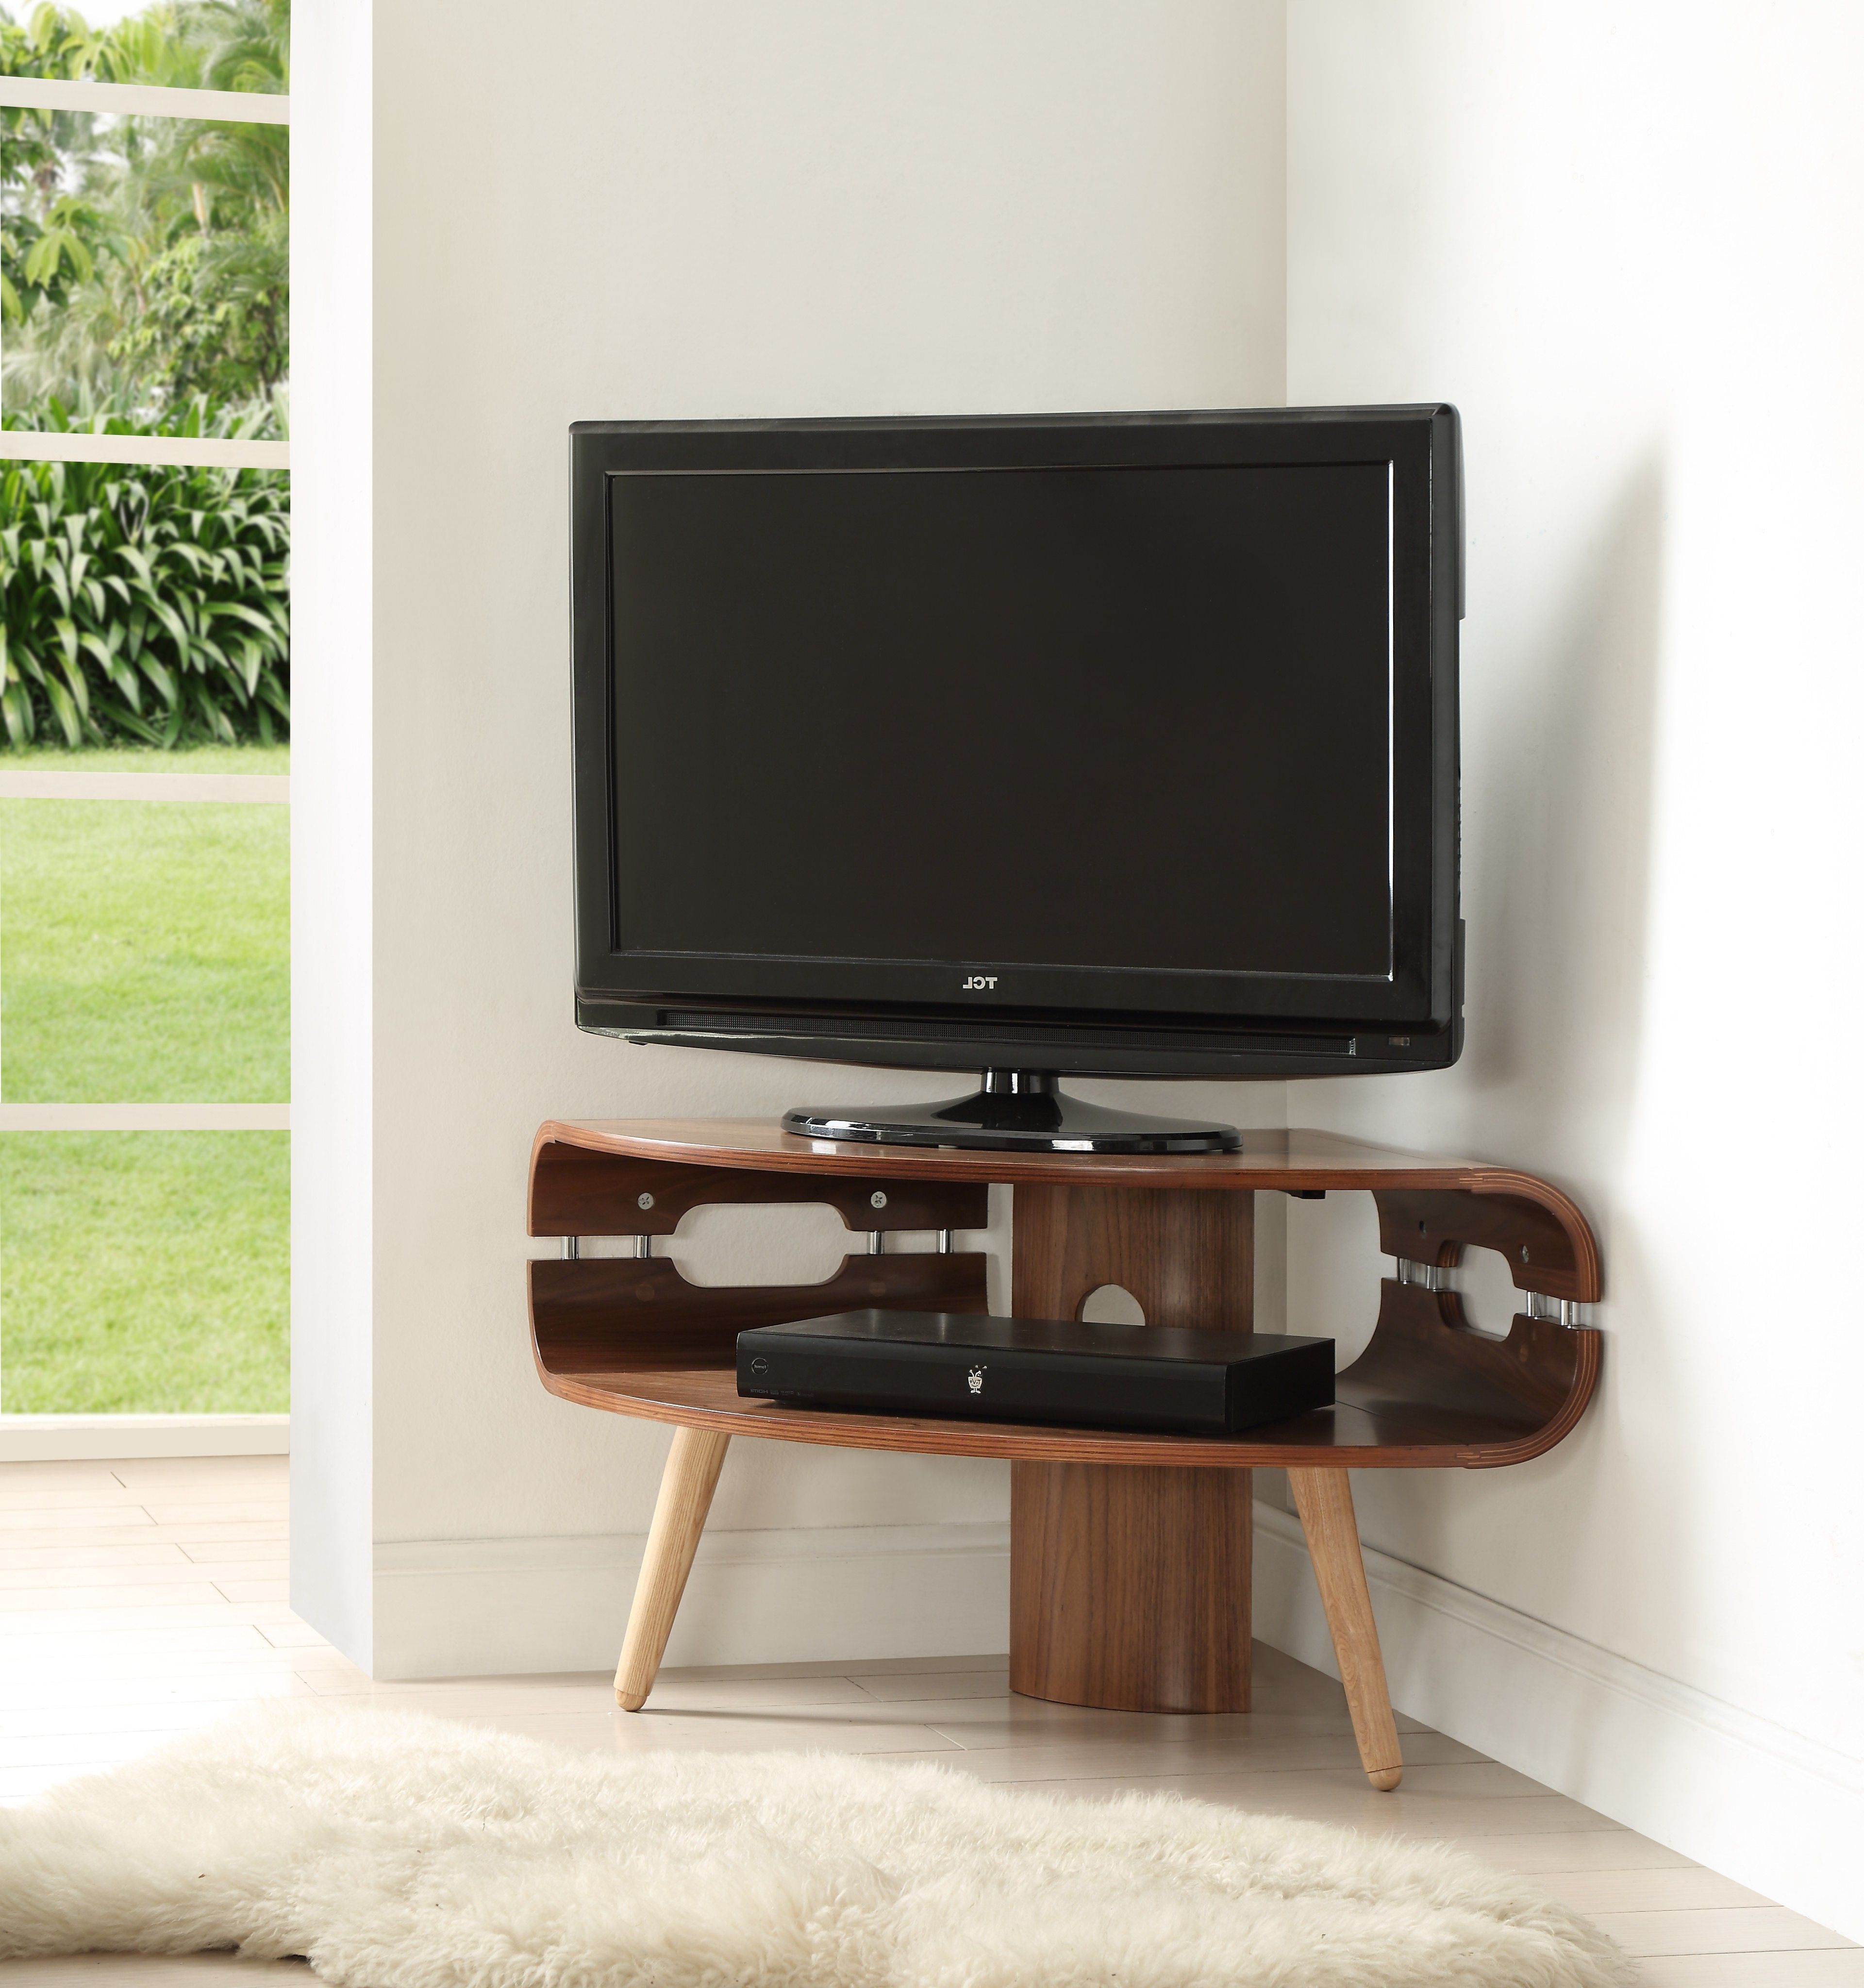 Jf701 Corner Tv Stand – Cooks Throughout Most Recently Released Corner Tv Cabinets For Flat Screens With Doors (Photo 1 of 20)